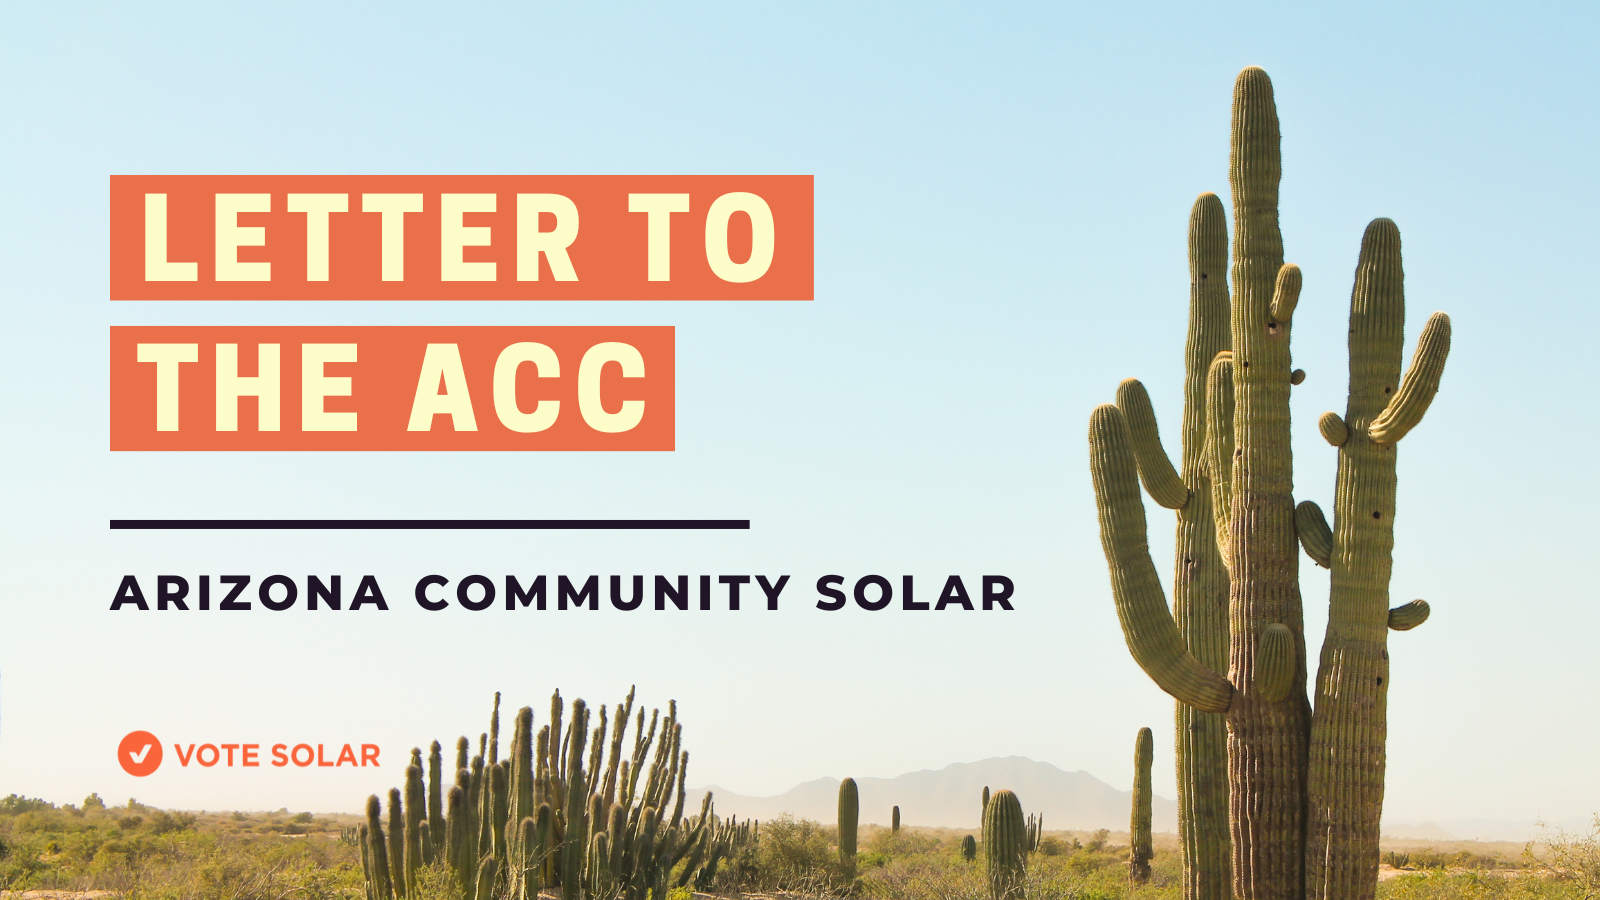 Vote Solar and Partners Letter To ACC Re: Community Solar